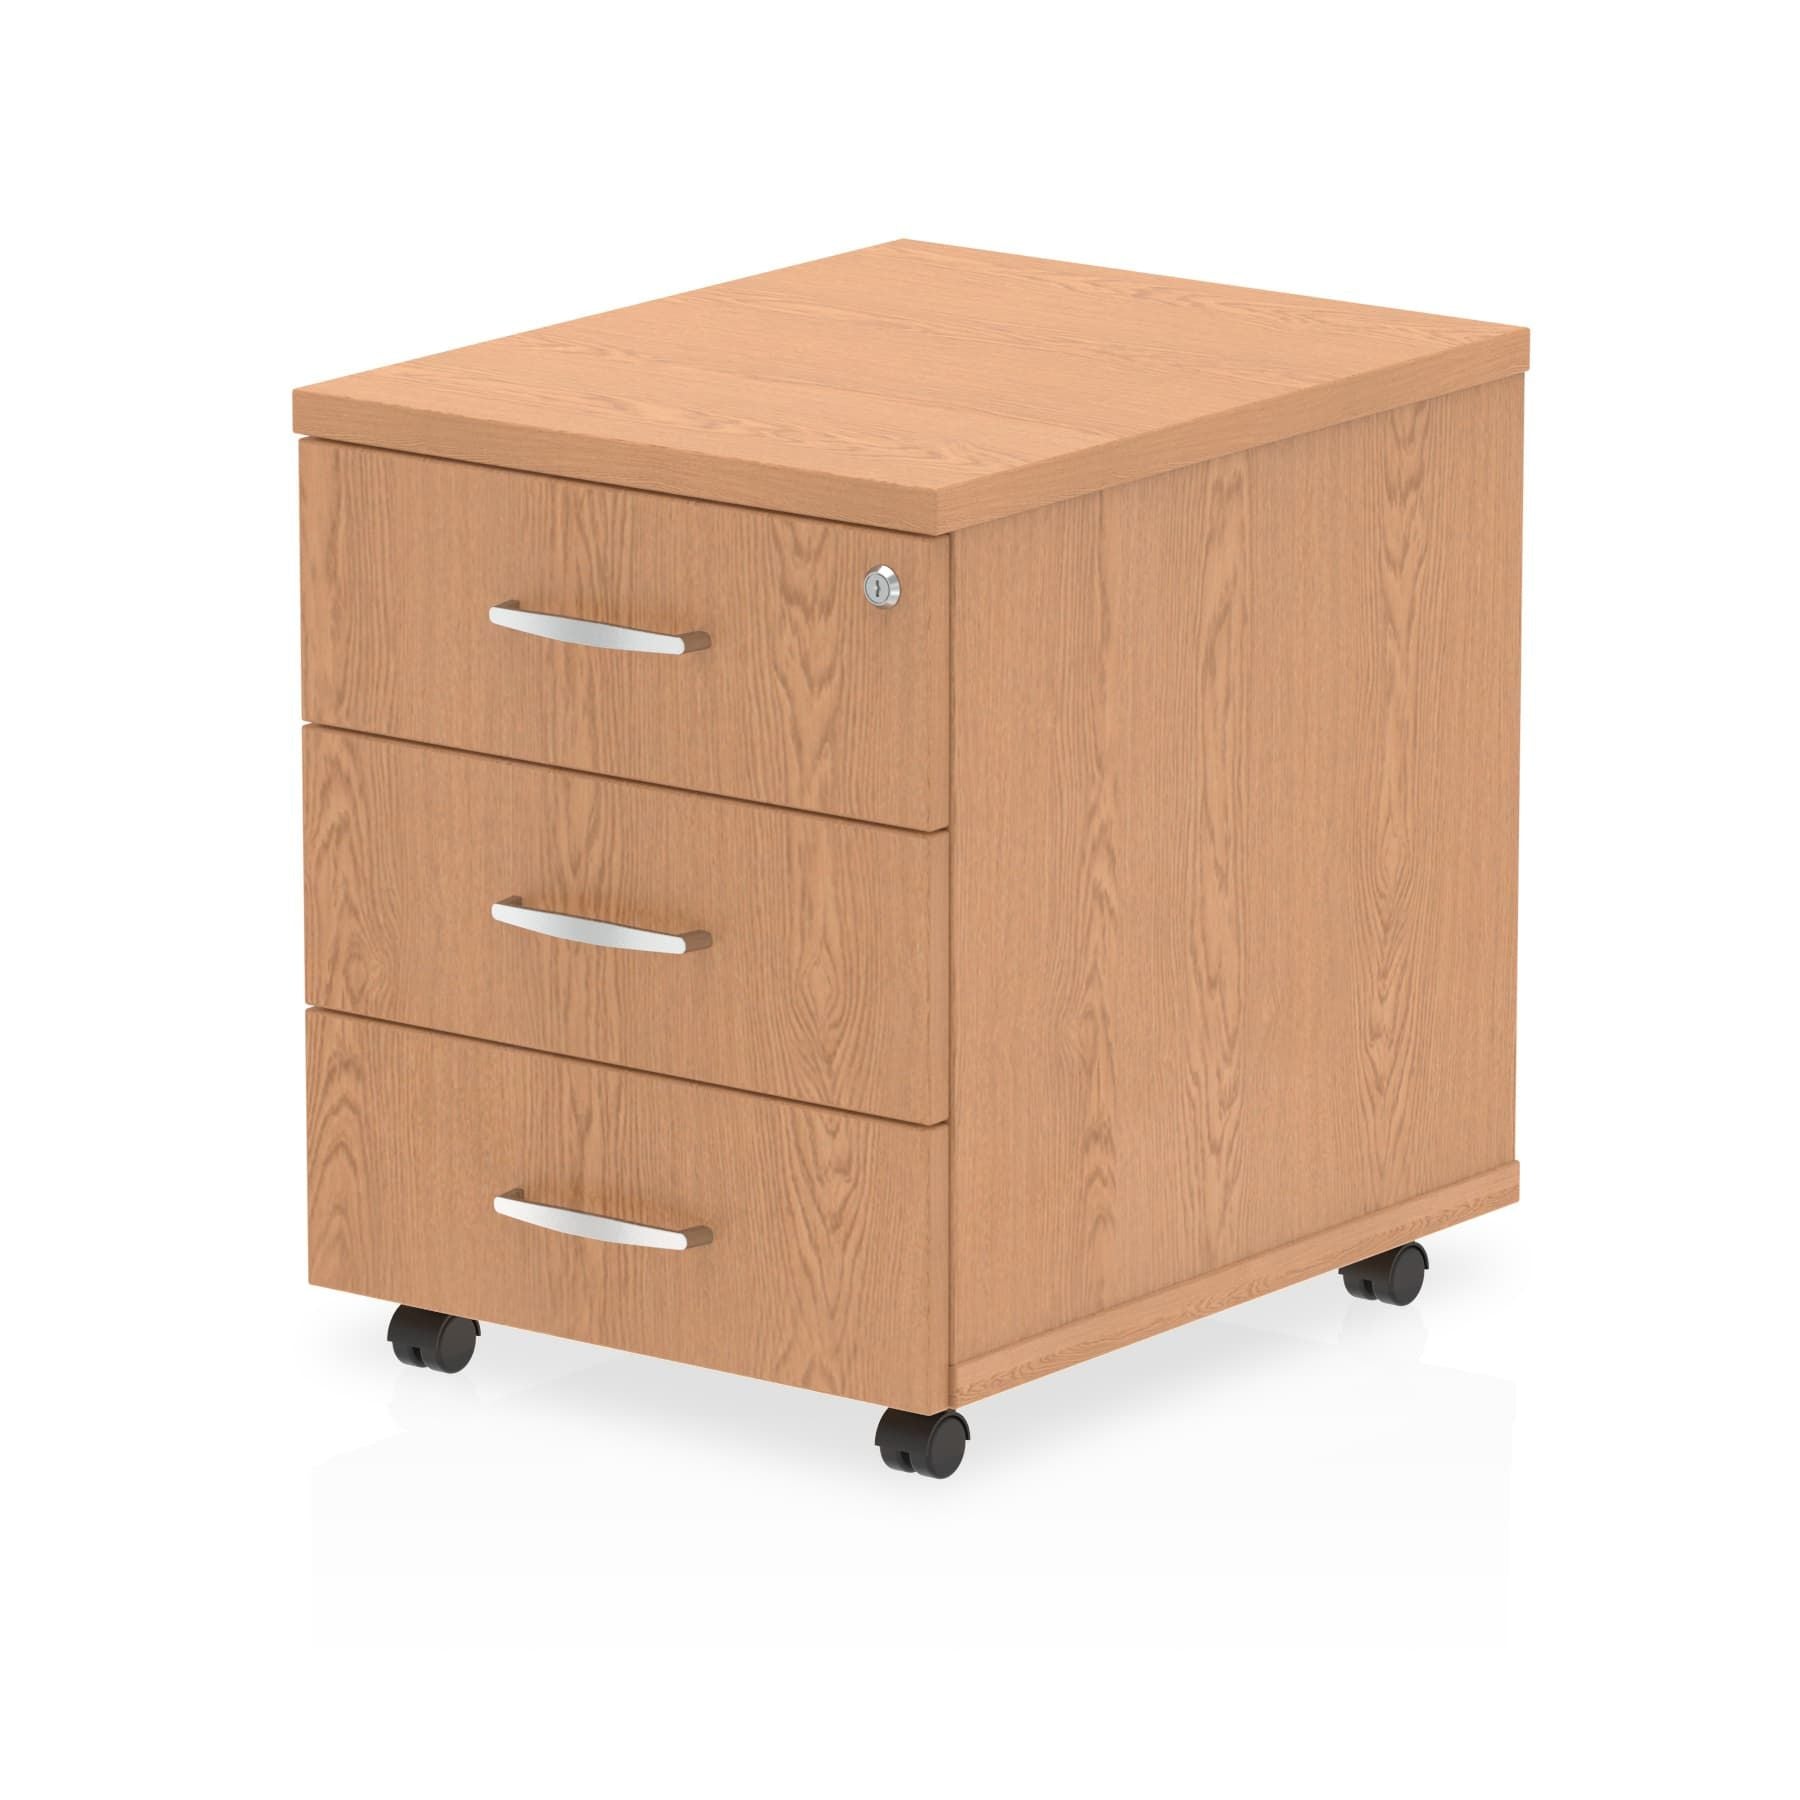 Impulse Mobile Pedestal - 2/3 Lockable Drawers, MFC Material, 430x500x510mm, 25mm Thickness, 5-Year Guarantee